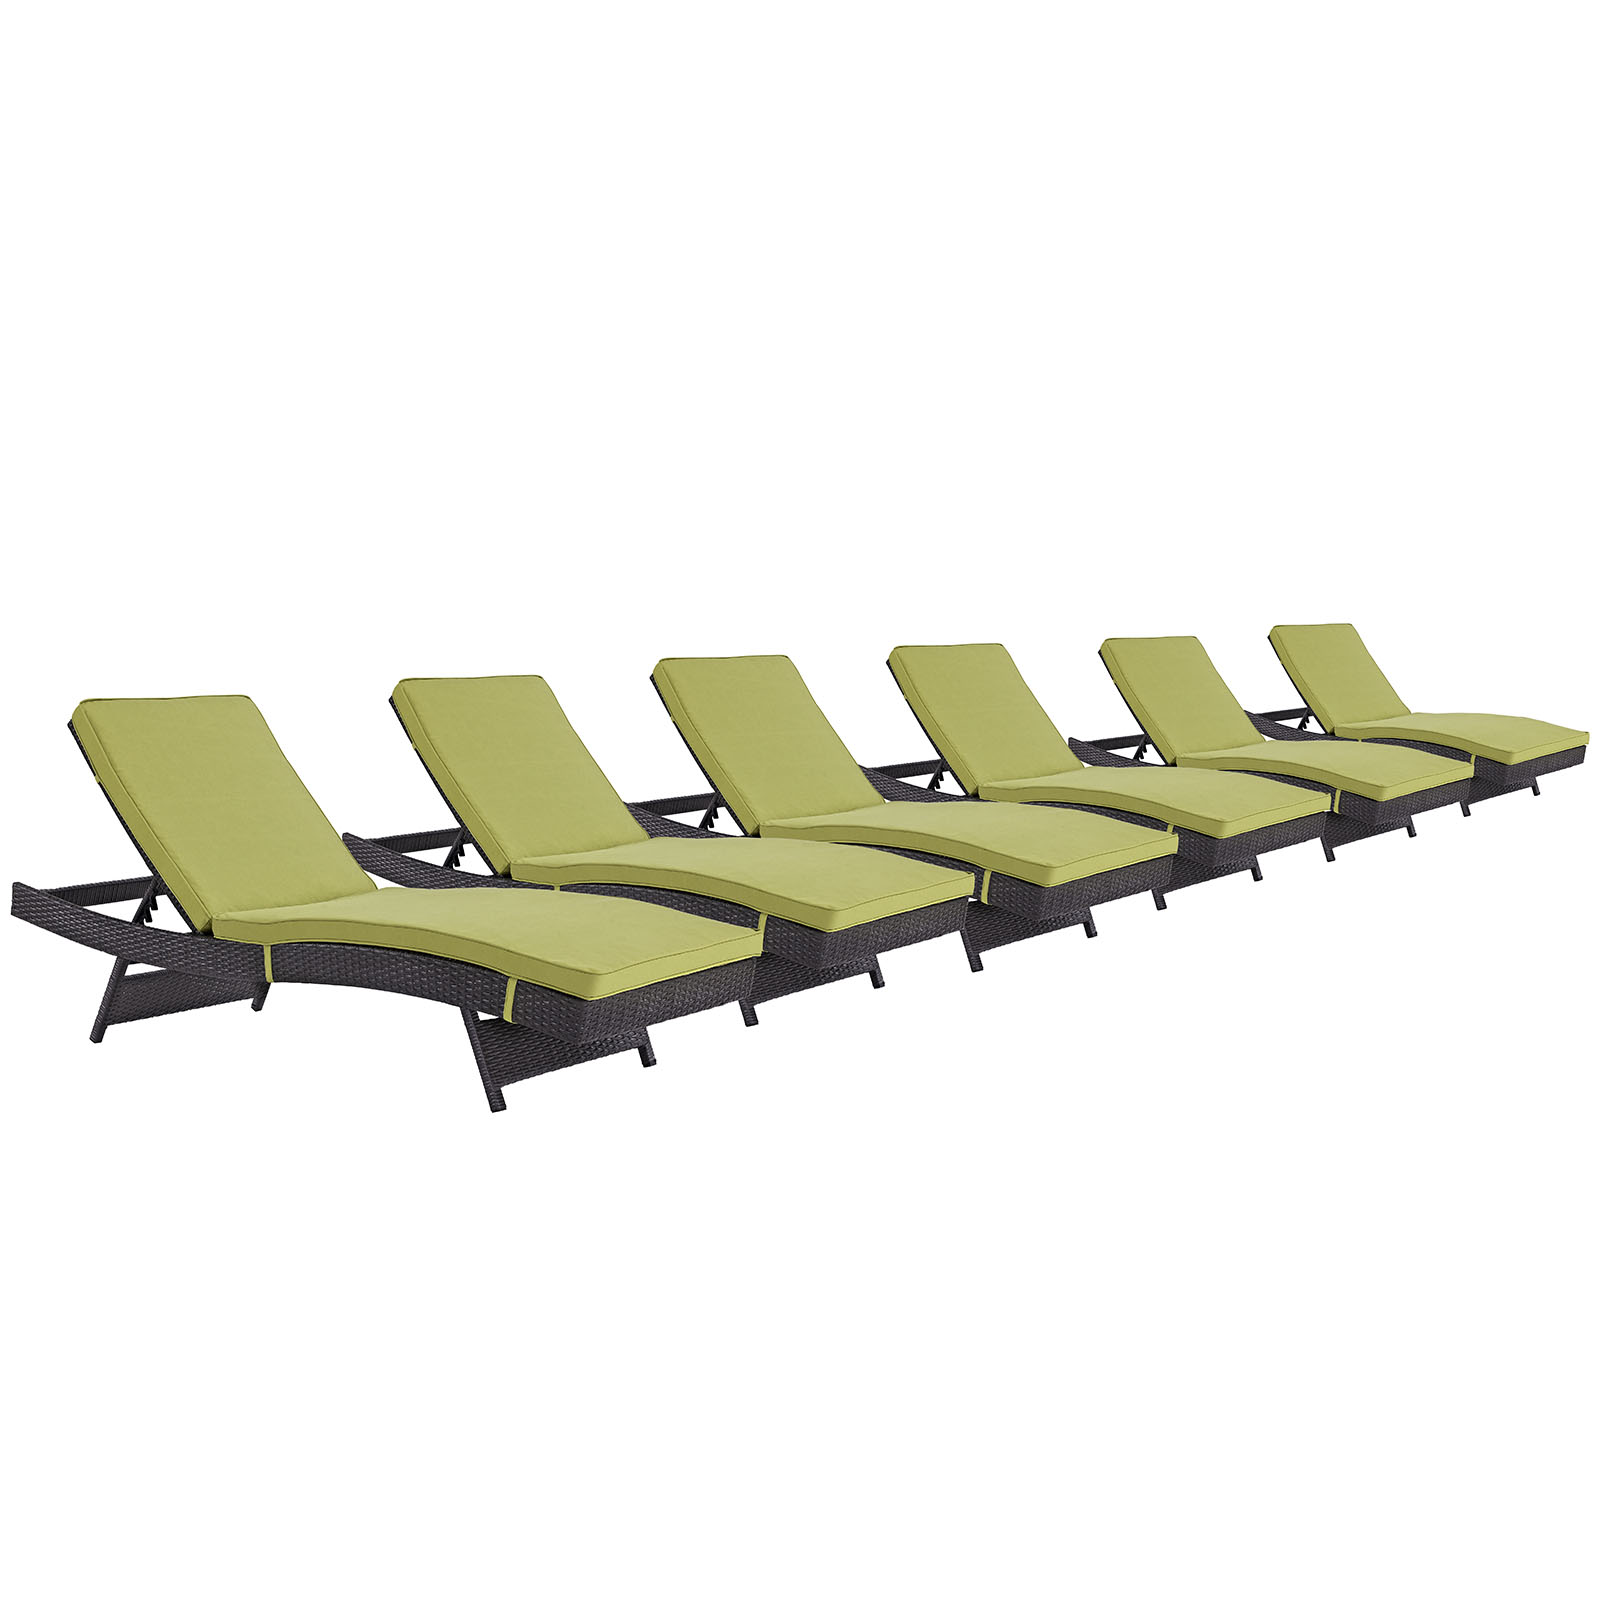 Modway Convene Chaise Outdoor Patio Set of 6 in Espresso Peridot - image 2 of 5